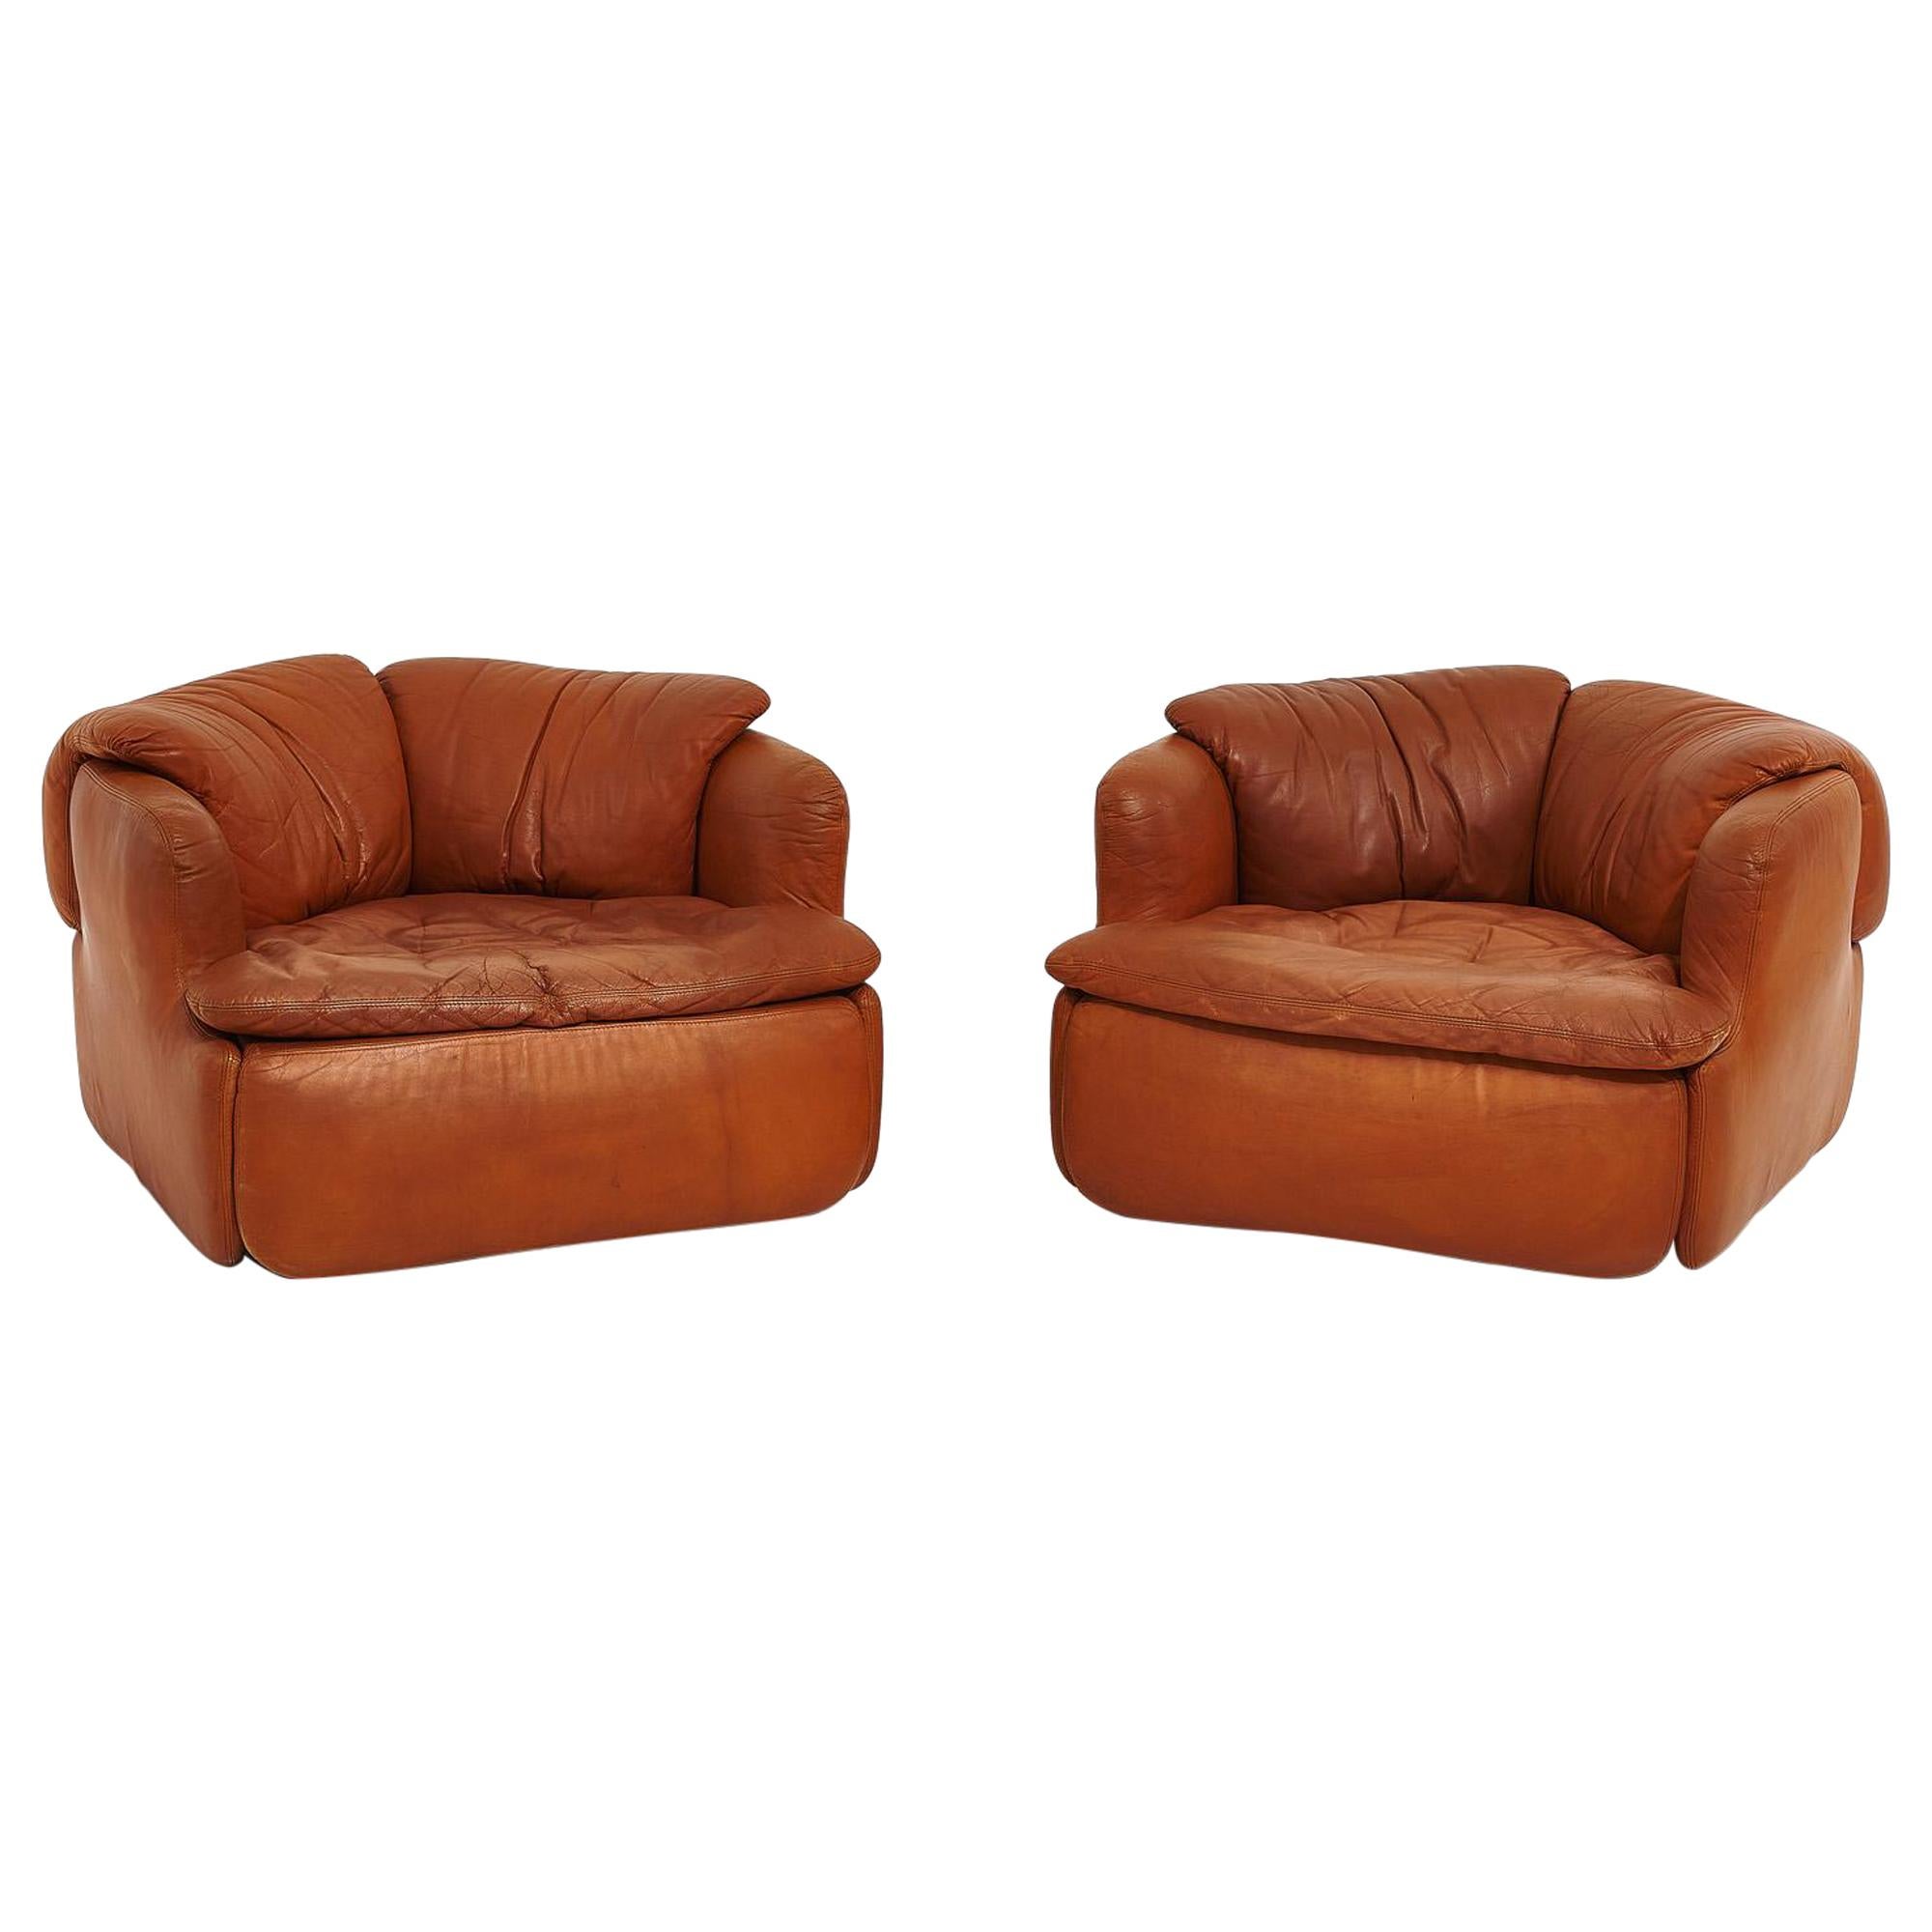 Alberto Rosselli for Saporiti Brown Leather “Confidential” Lounge Chairs